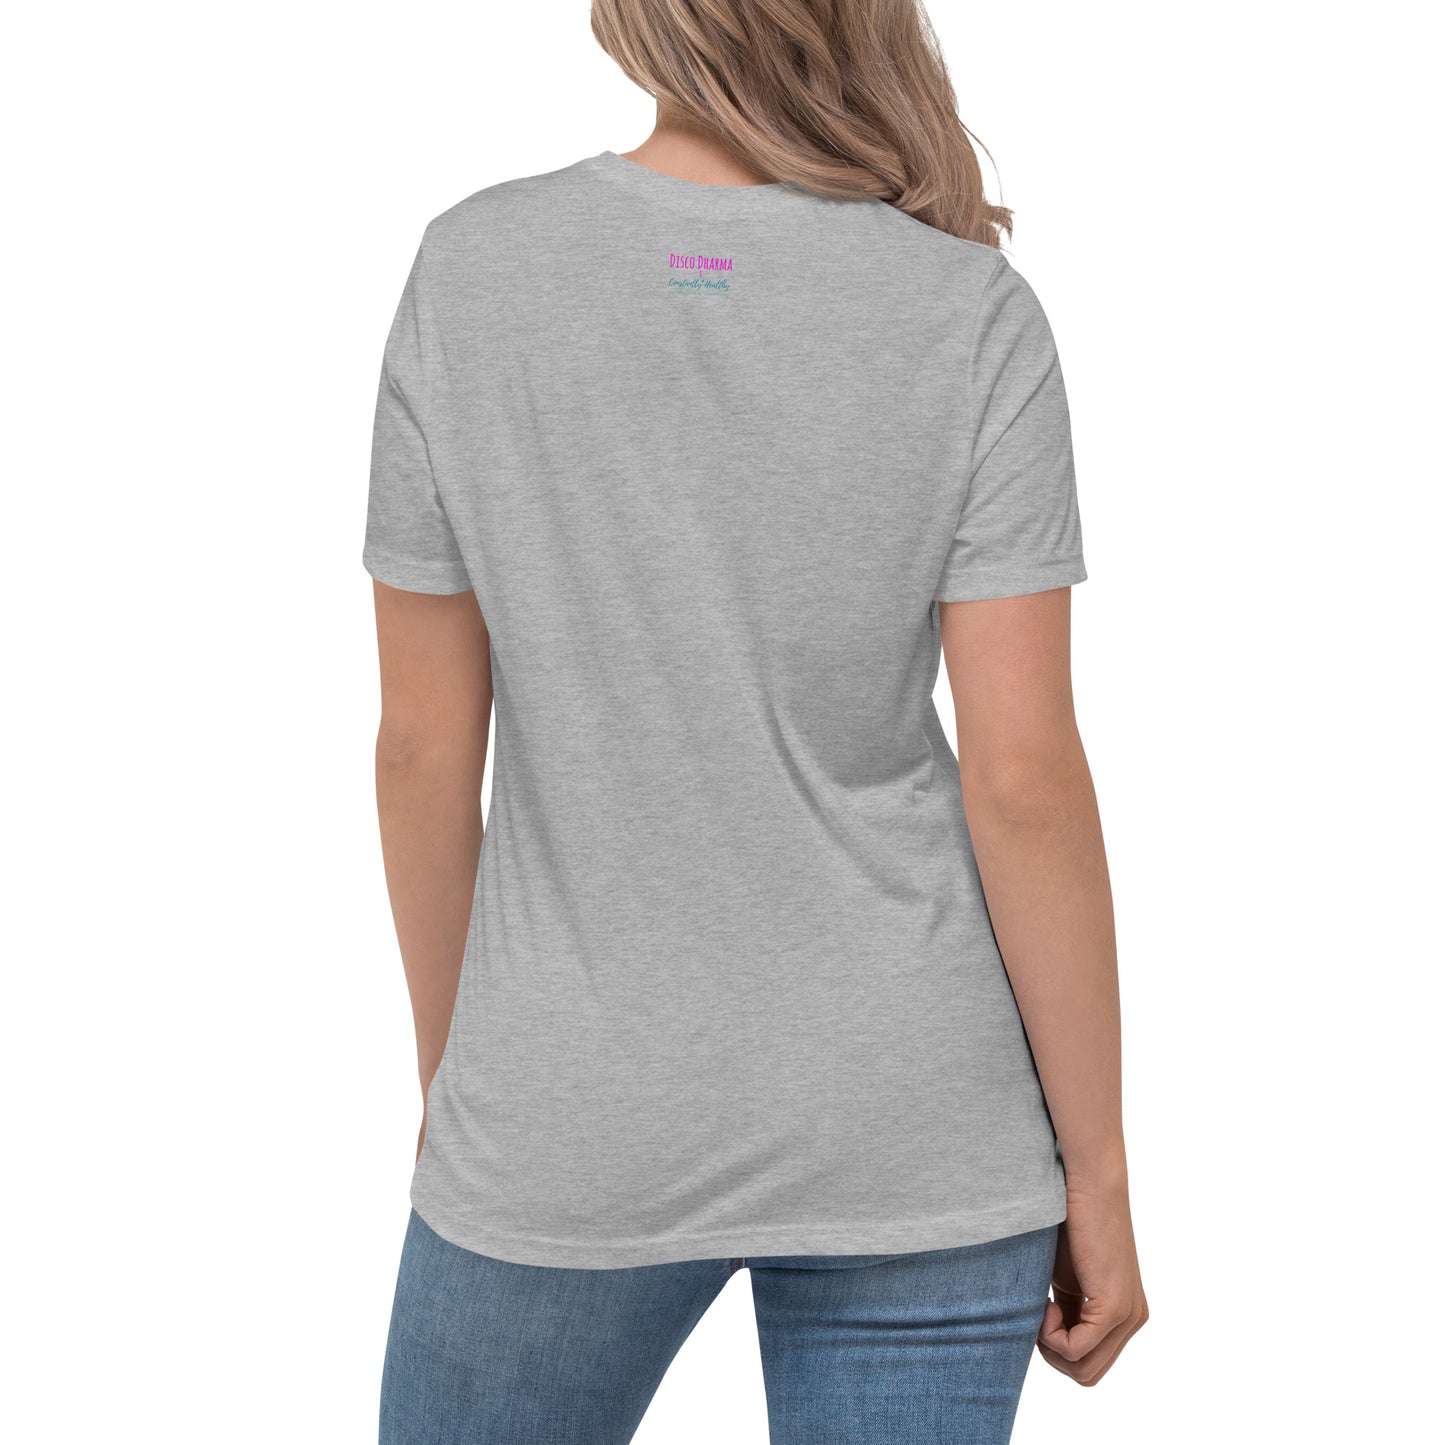 CH Therapy Women's Relaxed T-Shirt